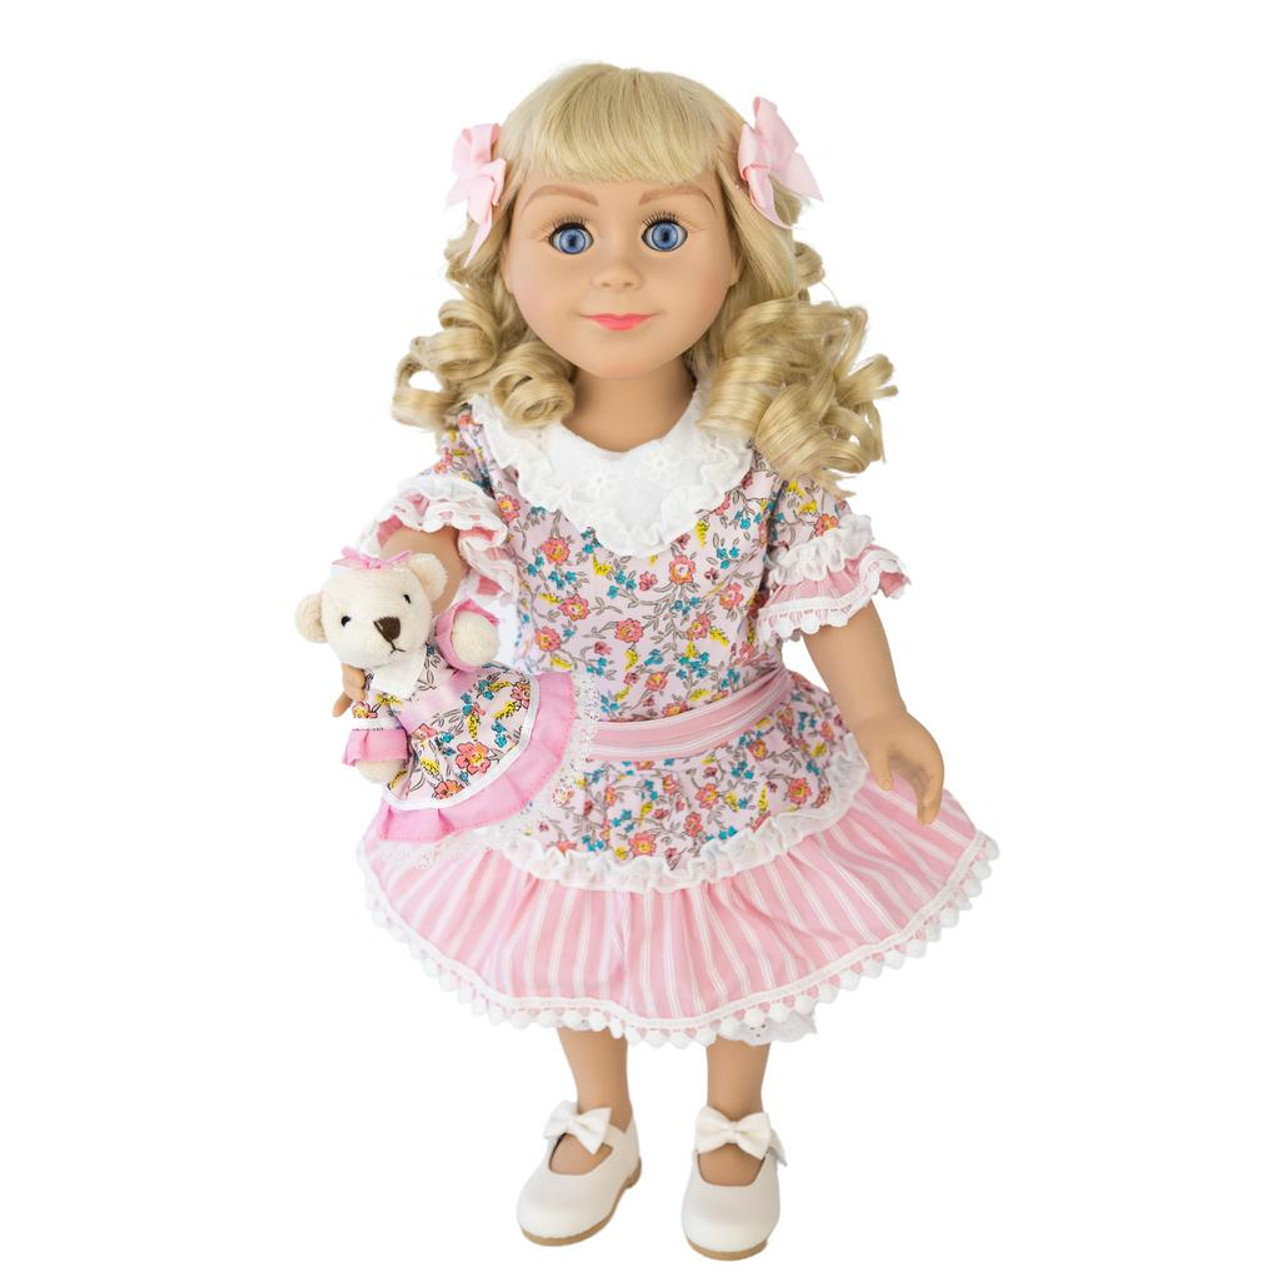 https://cdn11.bigcommerce.com/s-m5vcu70215/images/stencil/1280x1280/products/248/2573/the-queens-treasures-little-house-on-the-prairie-nellie-oleson-18-inch-doll__61117.1692302438.jpg?c=1